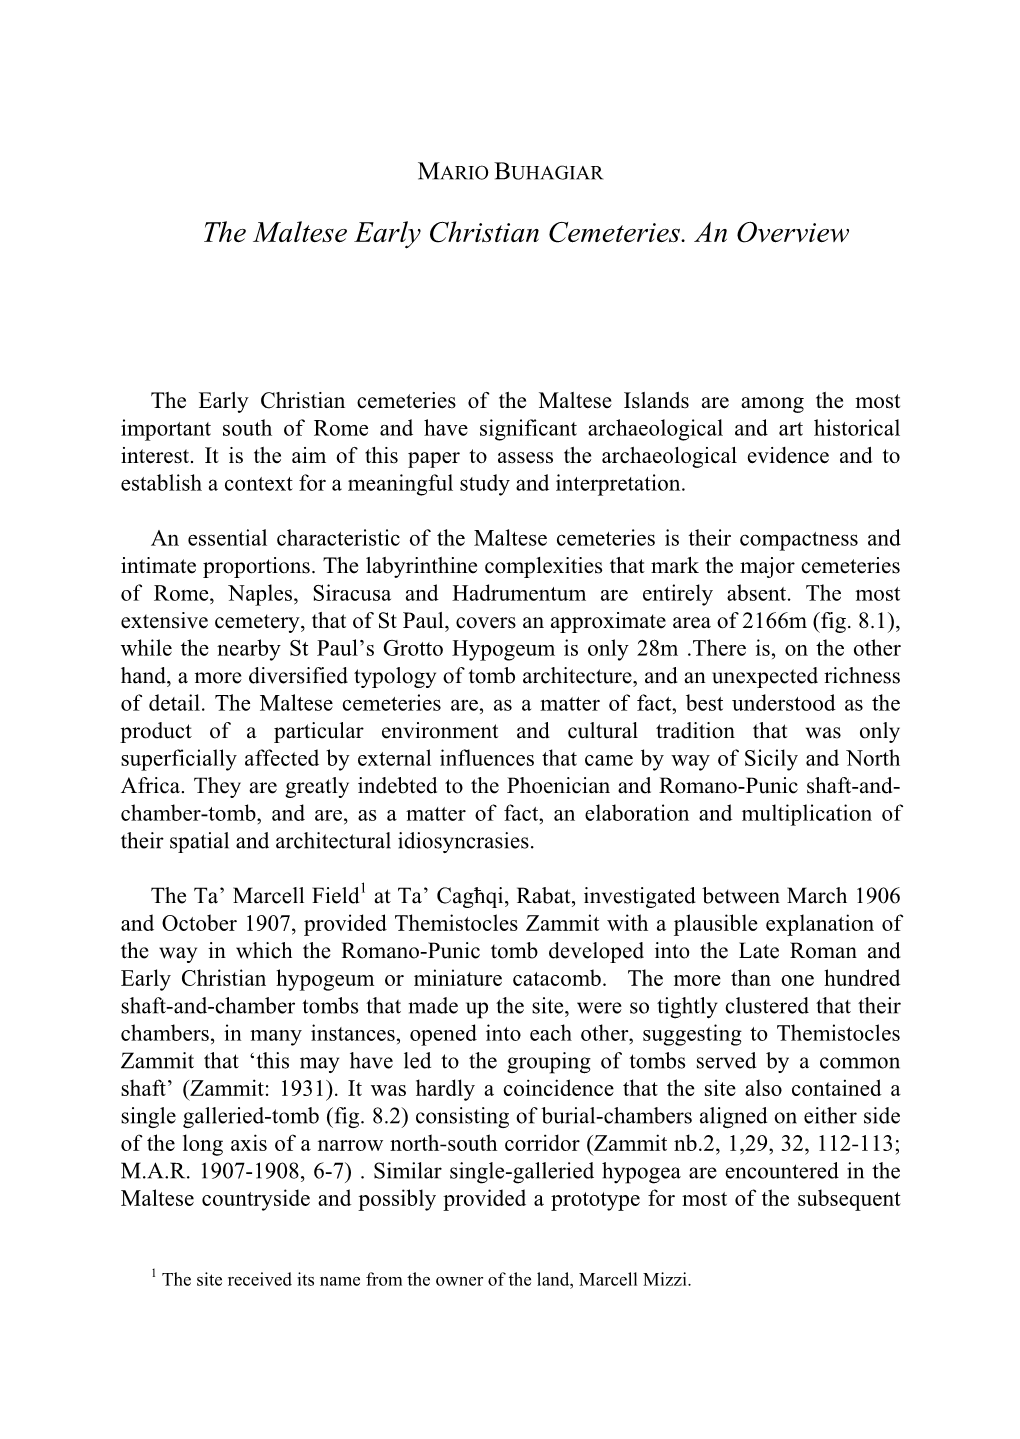 The Maltese Early Christian Cemeteries. an Overview